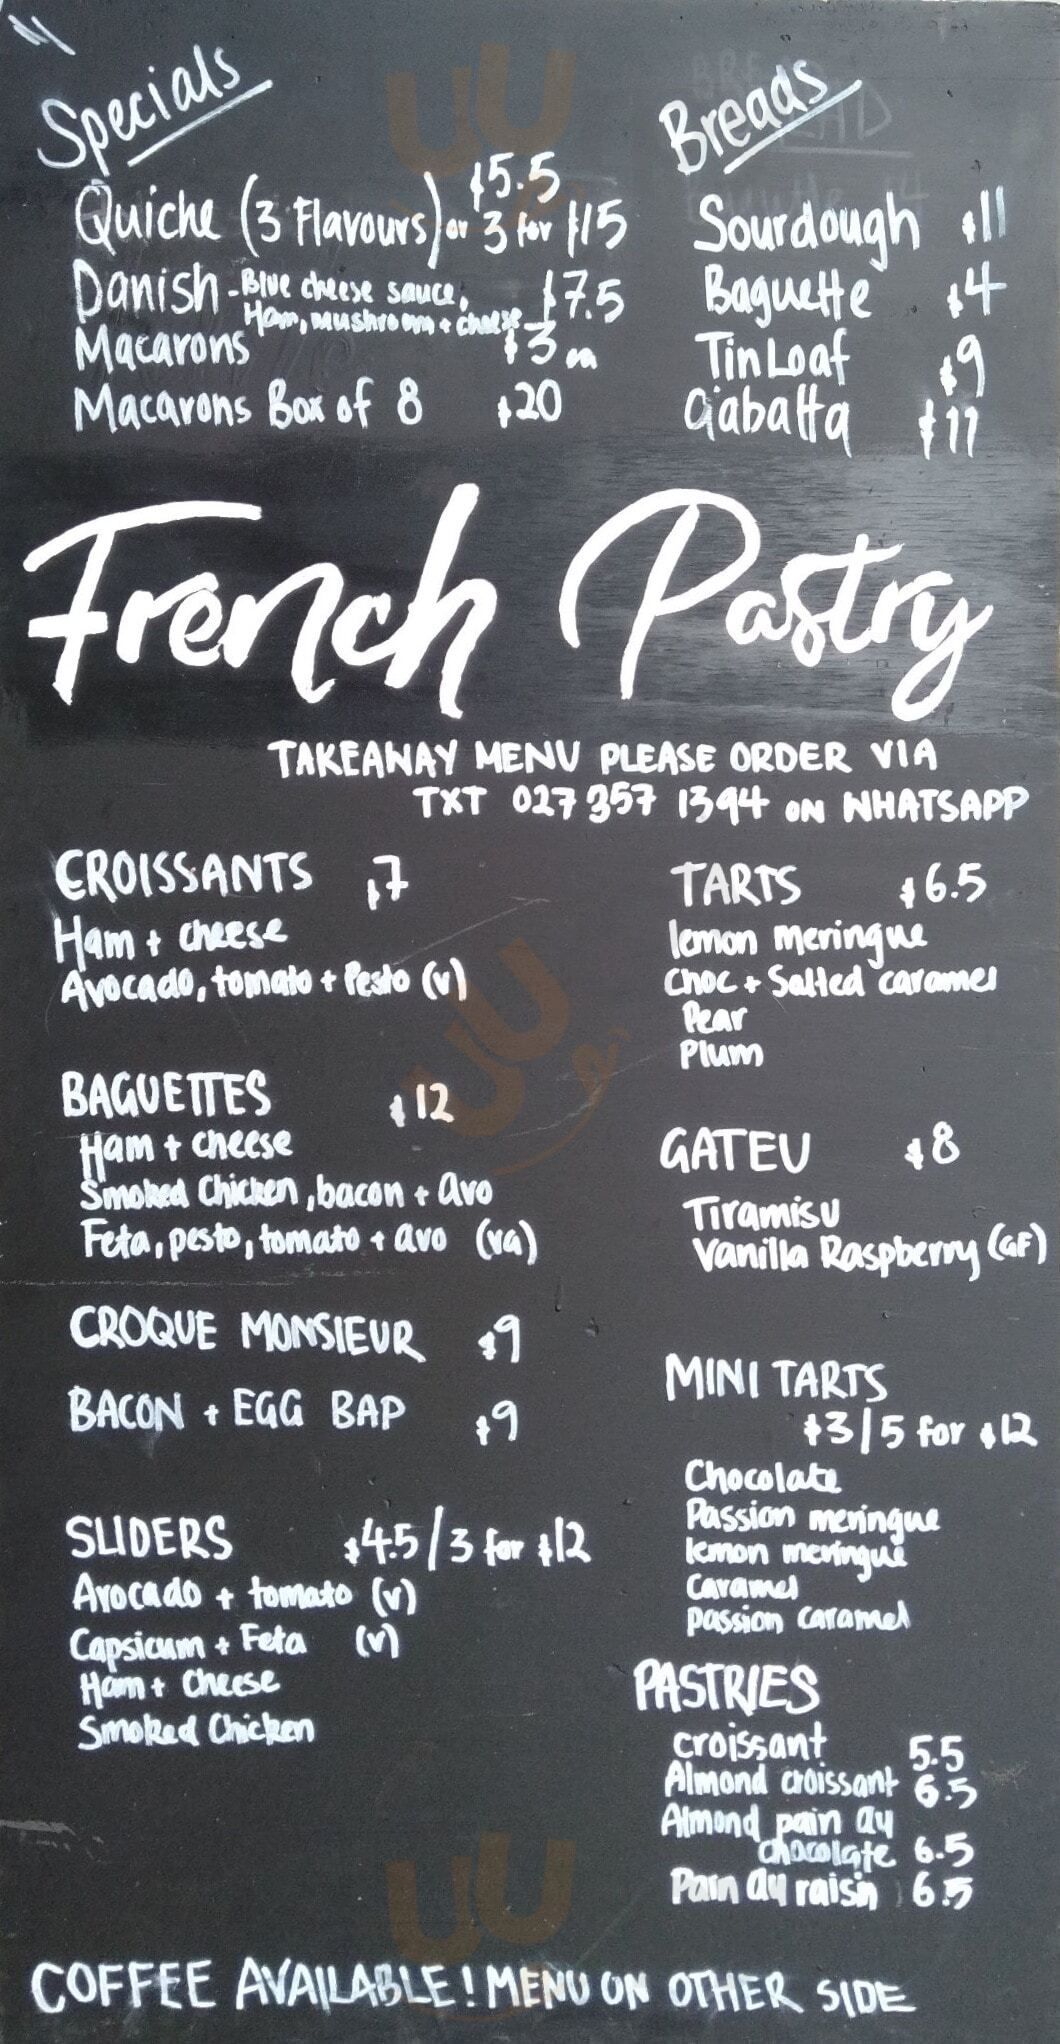 Little French Pastry Auckland Central Menu - 1